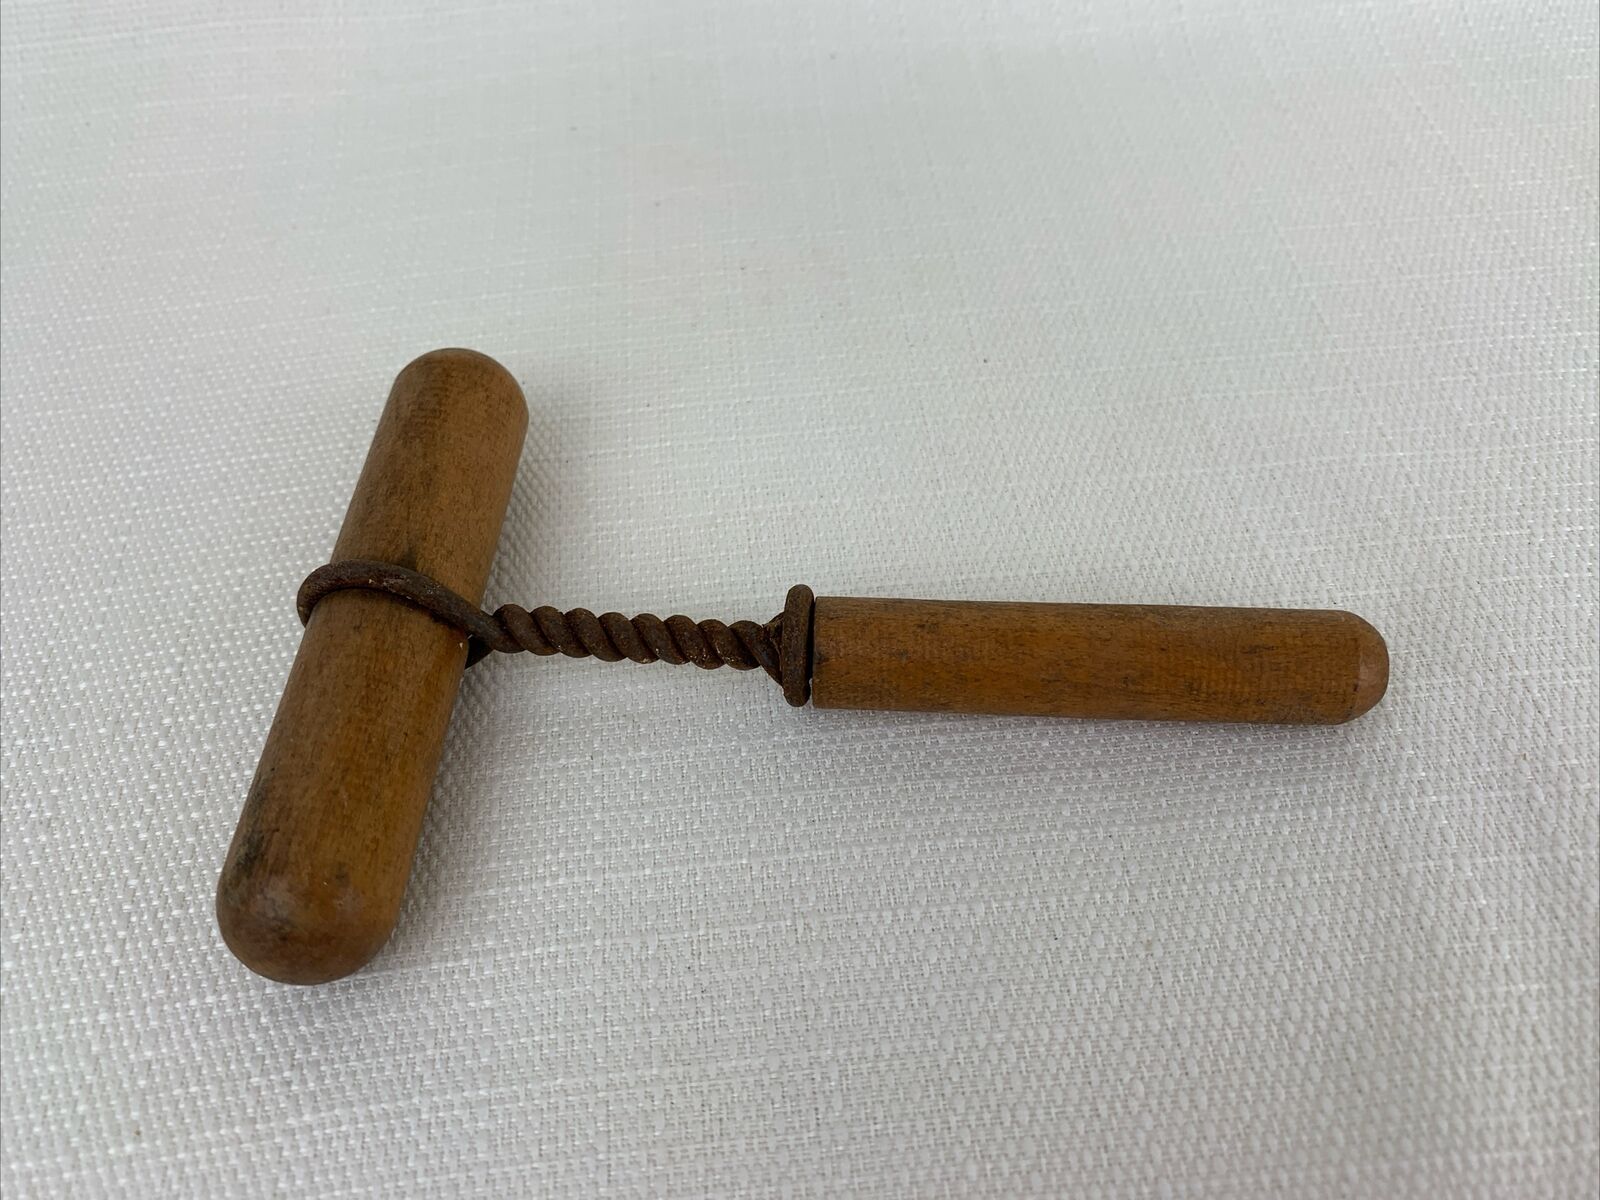 Antique Clough Direct Pull Corkscrew, Wood Handle and Sheath, No Advertising